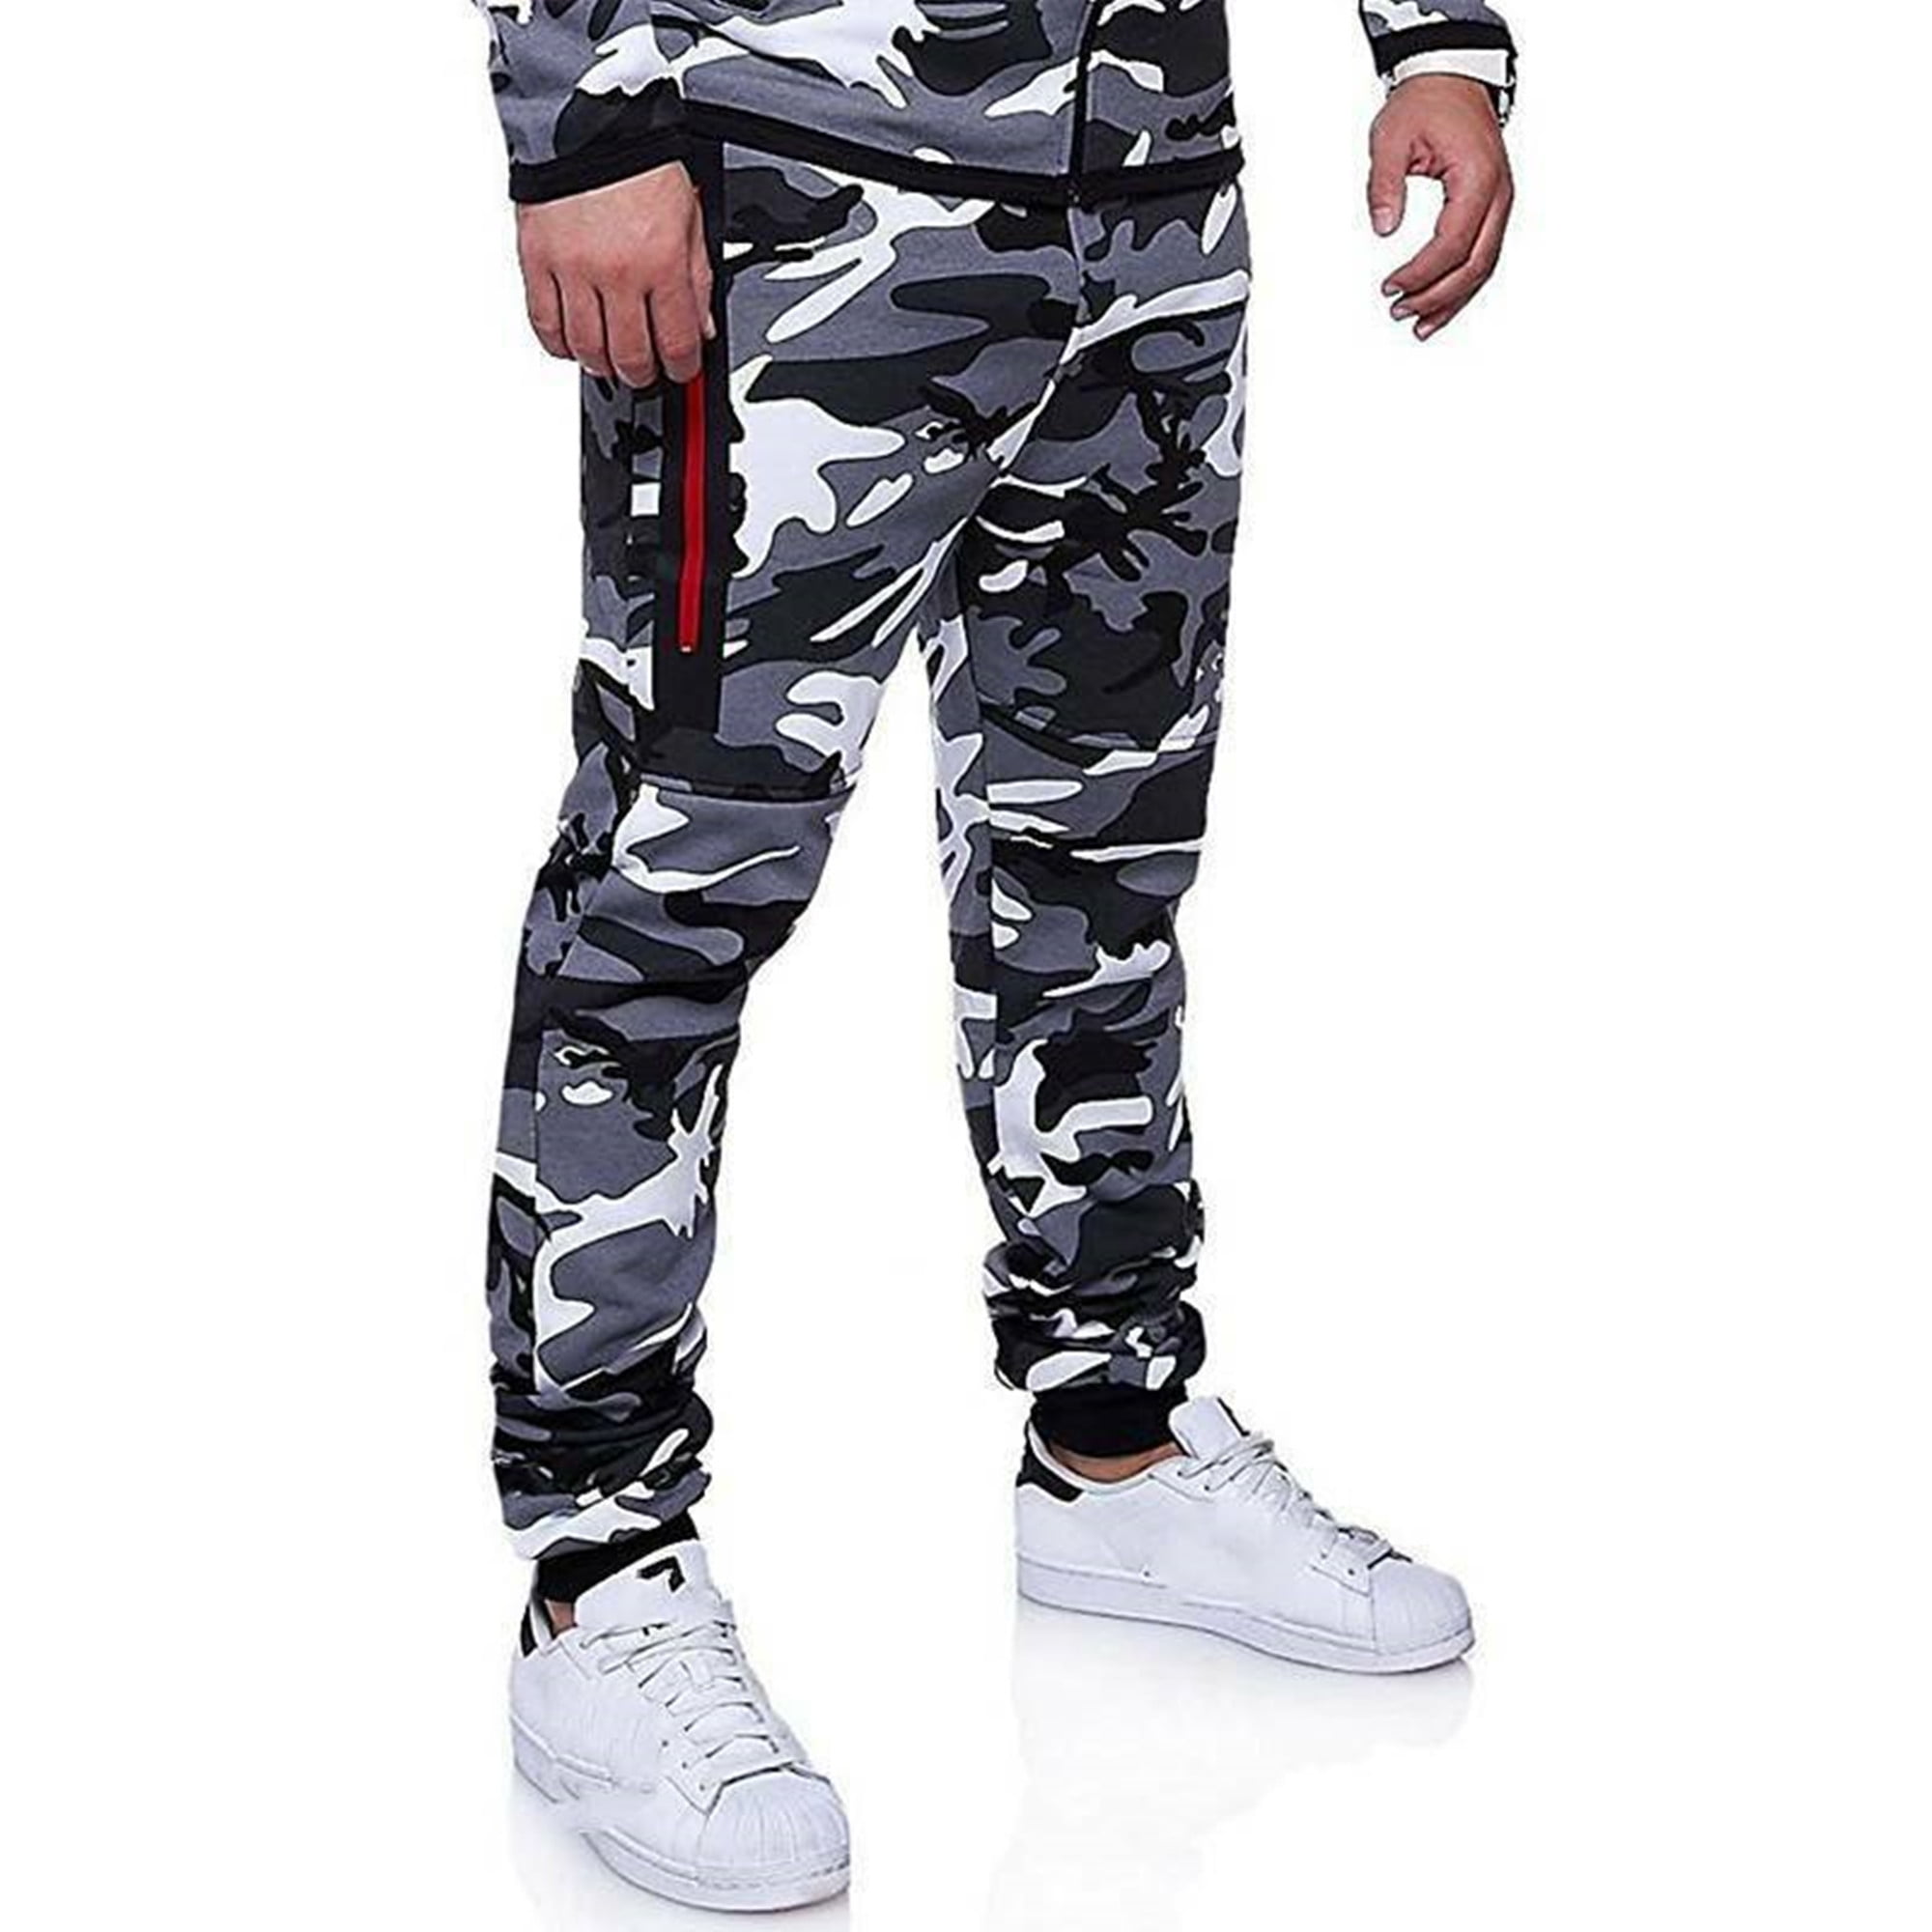 Mens Camo Gym Slim Fit Trousers Tracksuit Sport Jogger Cargo Skinny Sweat Pants 